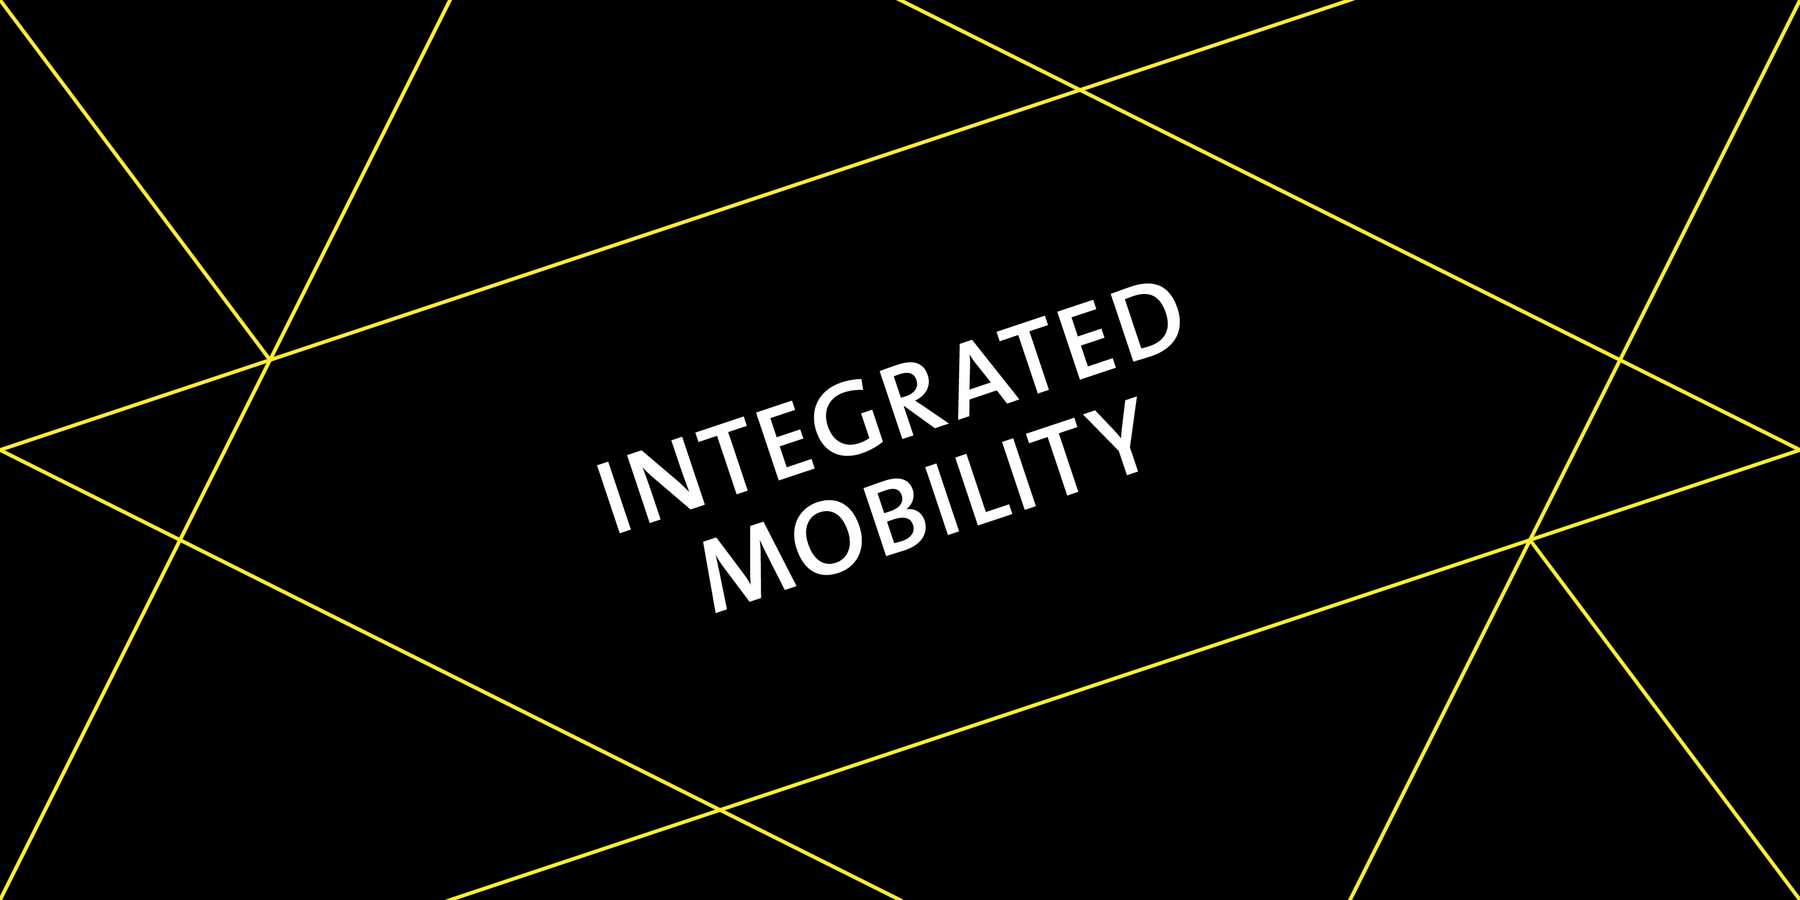 World Cities Summit Integrated Mobility